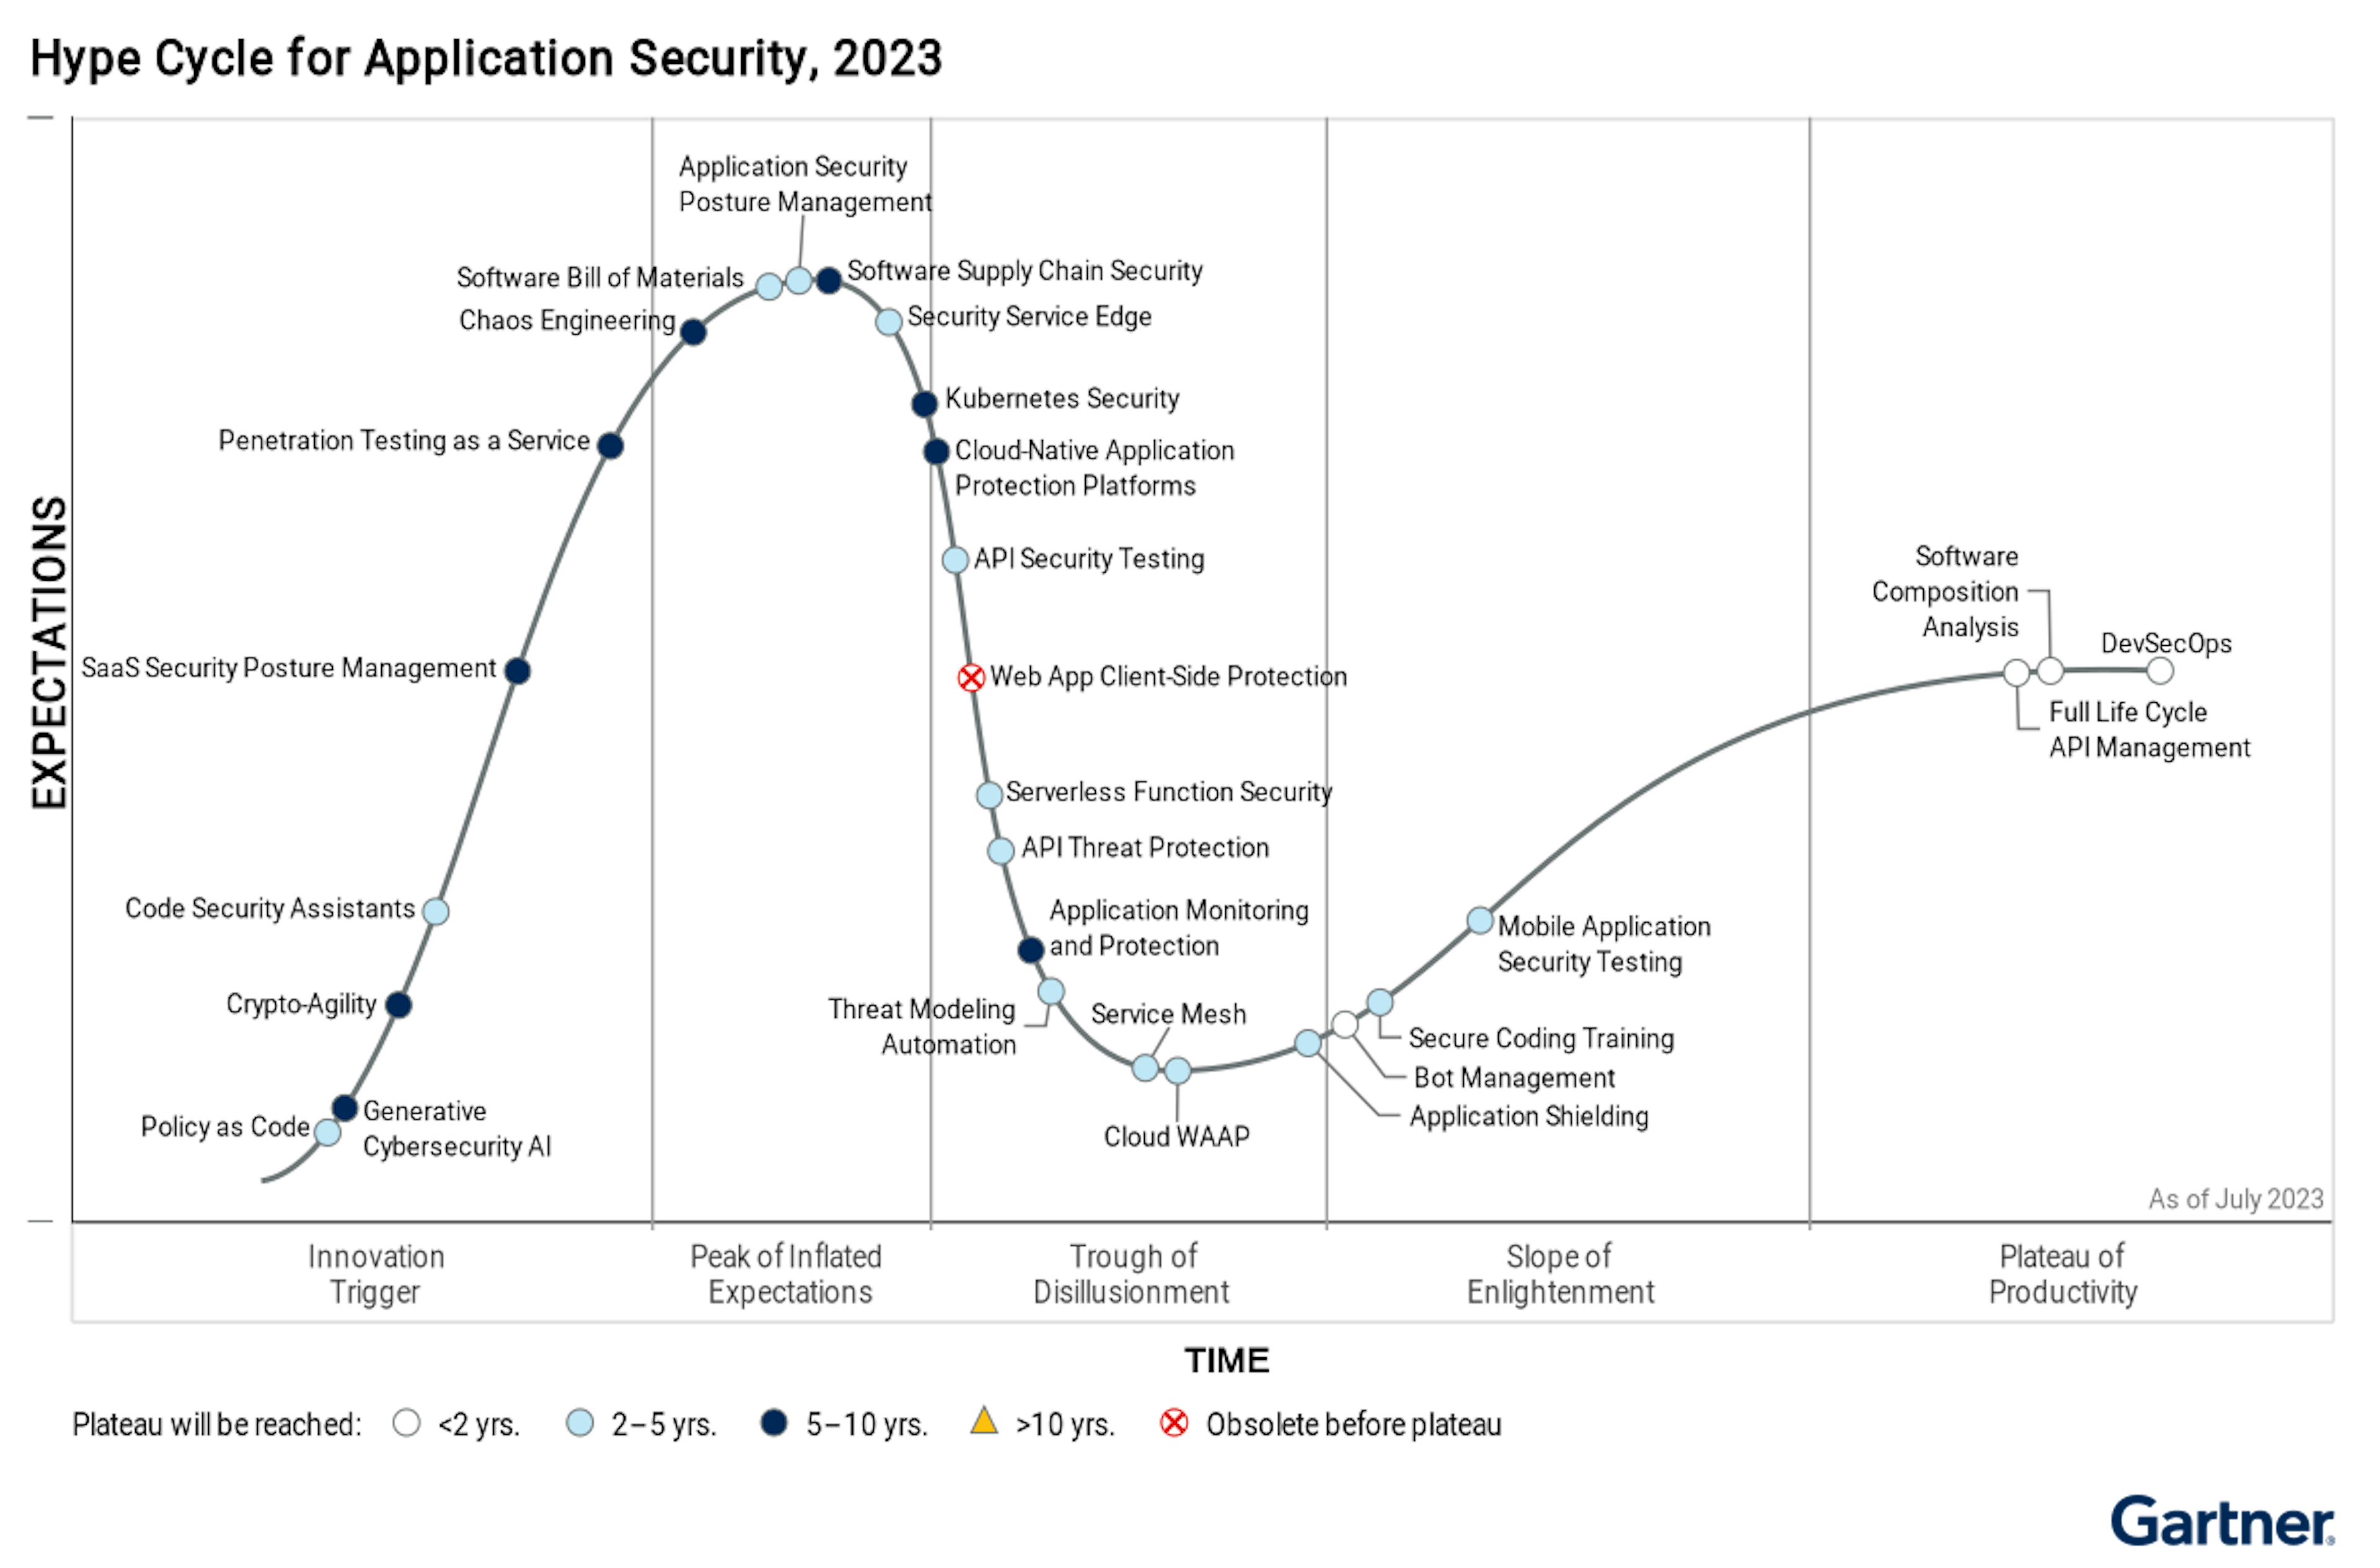 Hype Cycle for Application Security